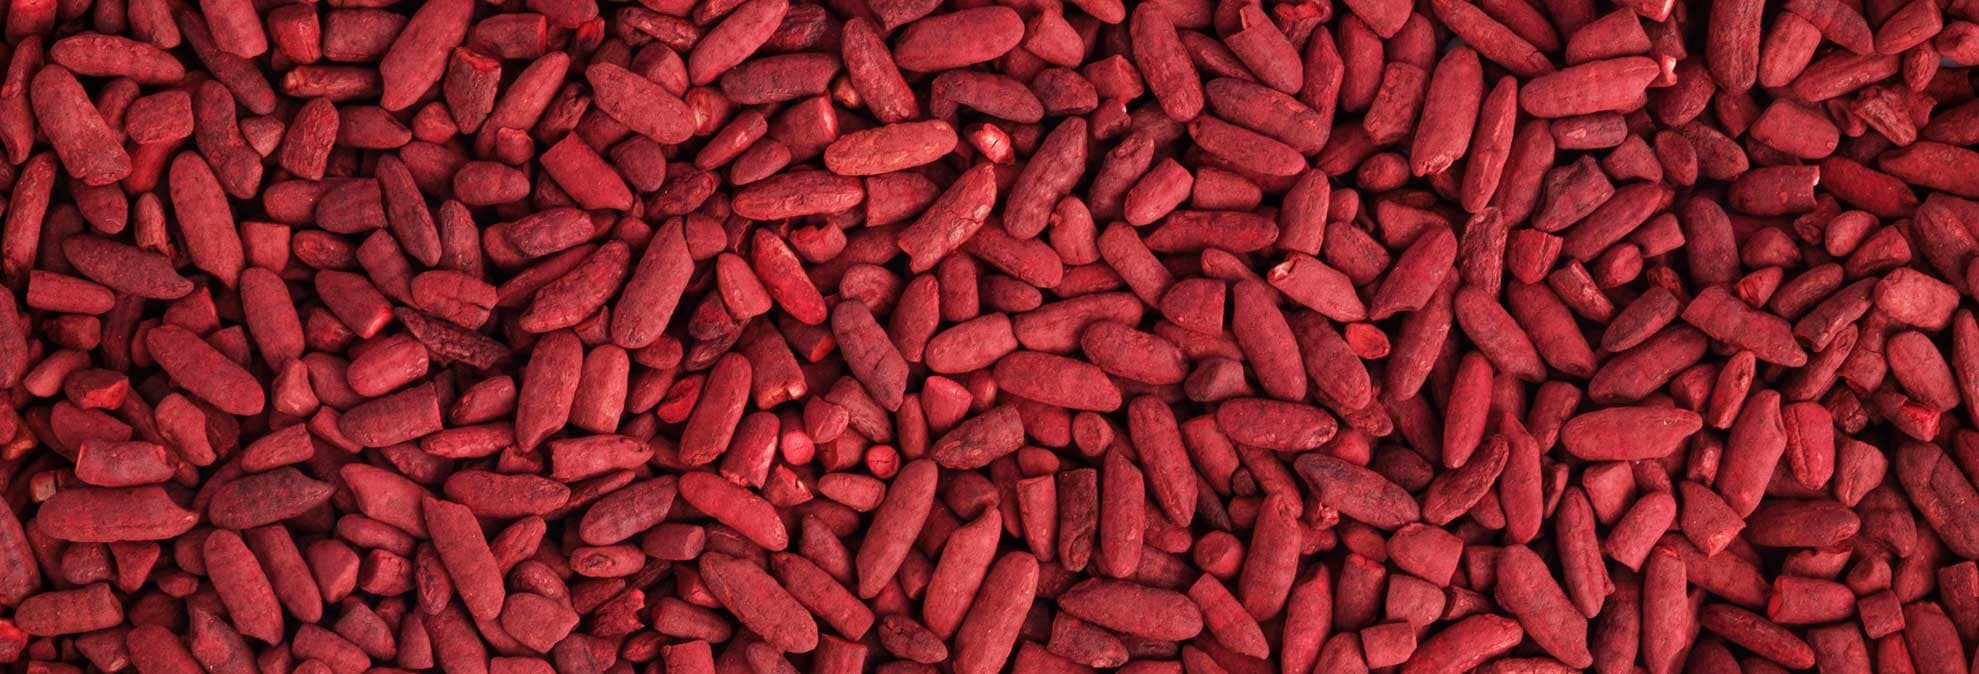 Red Yeast Rice Supplements May Contain Dangerous Surprises - ConsumerReports.org